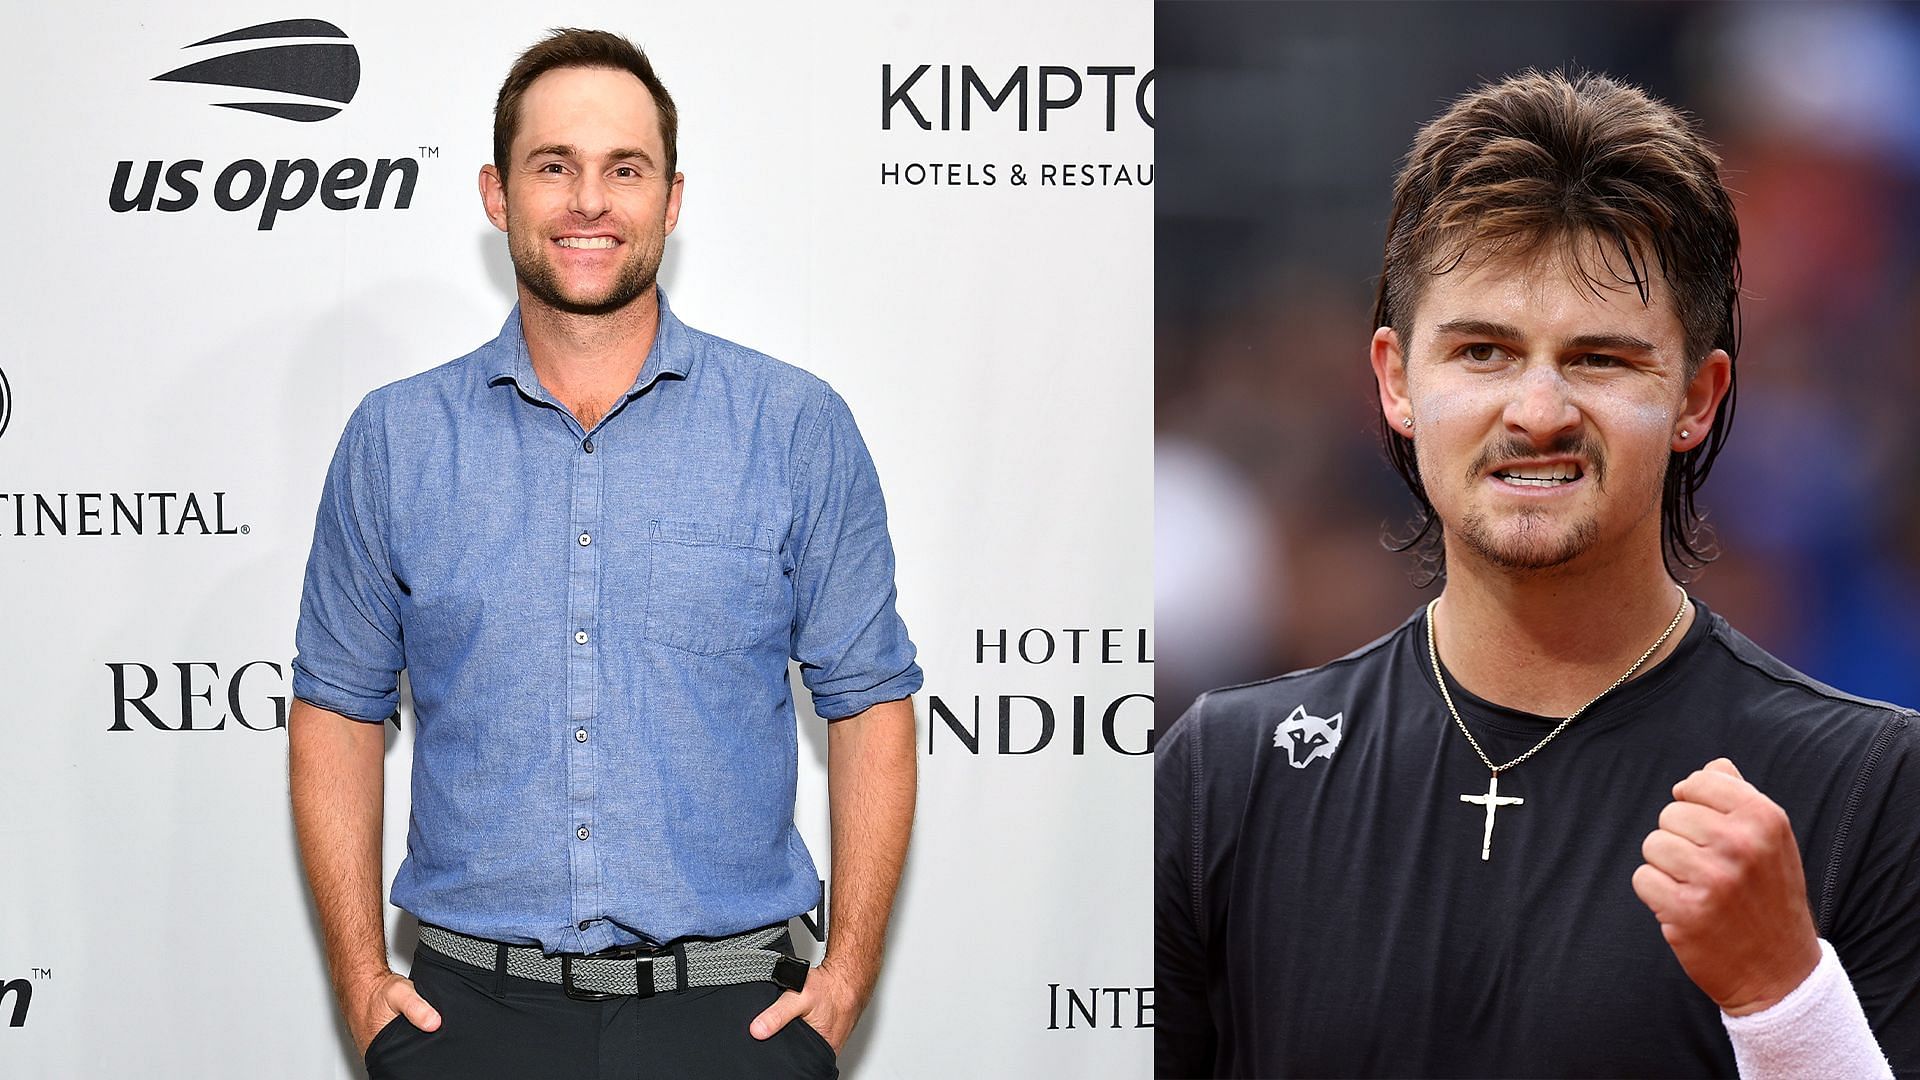 Andy Roddick: There is no chance J.J. Wolf got that haircut in